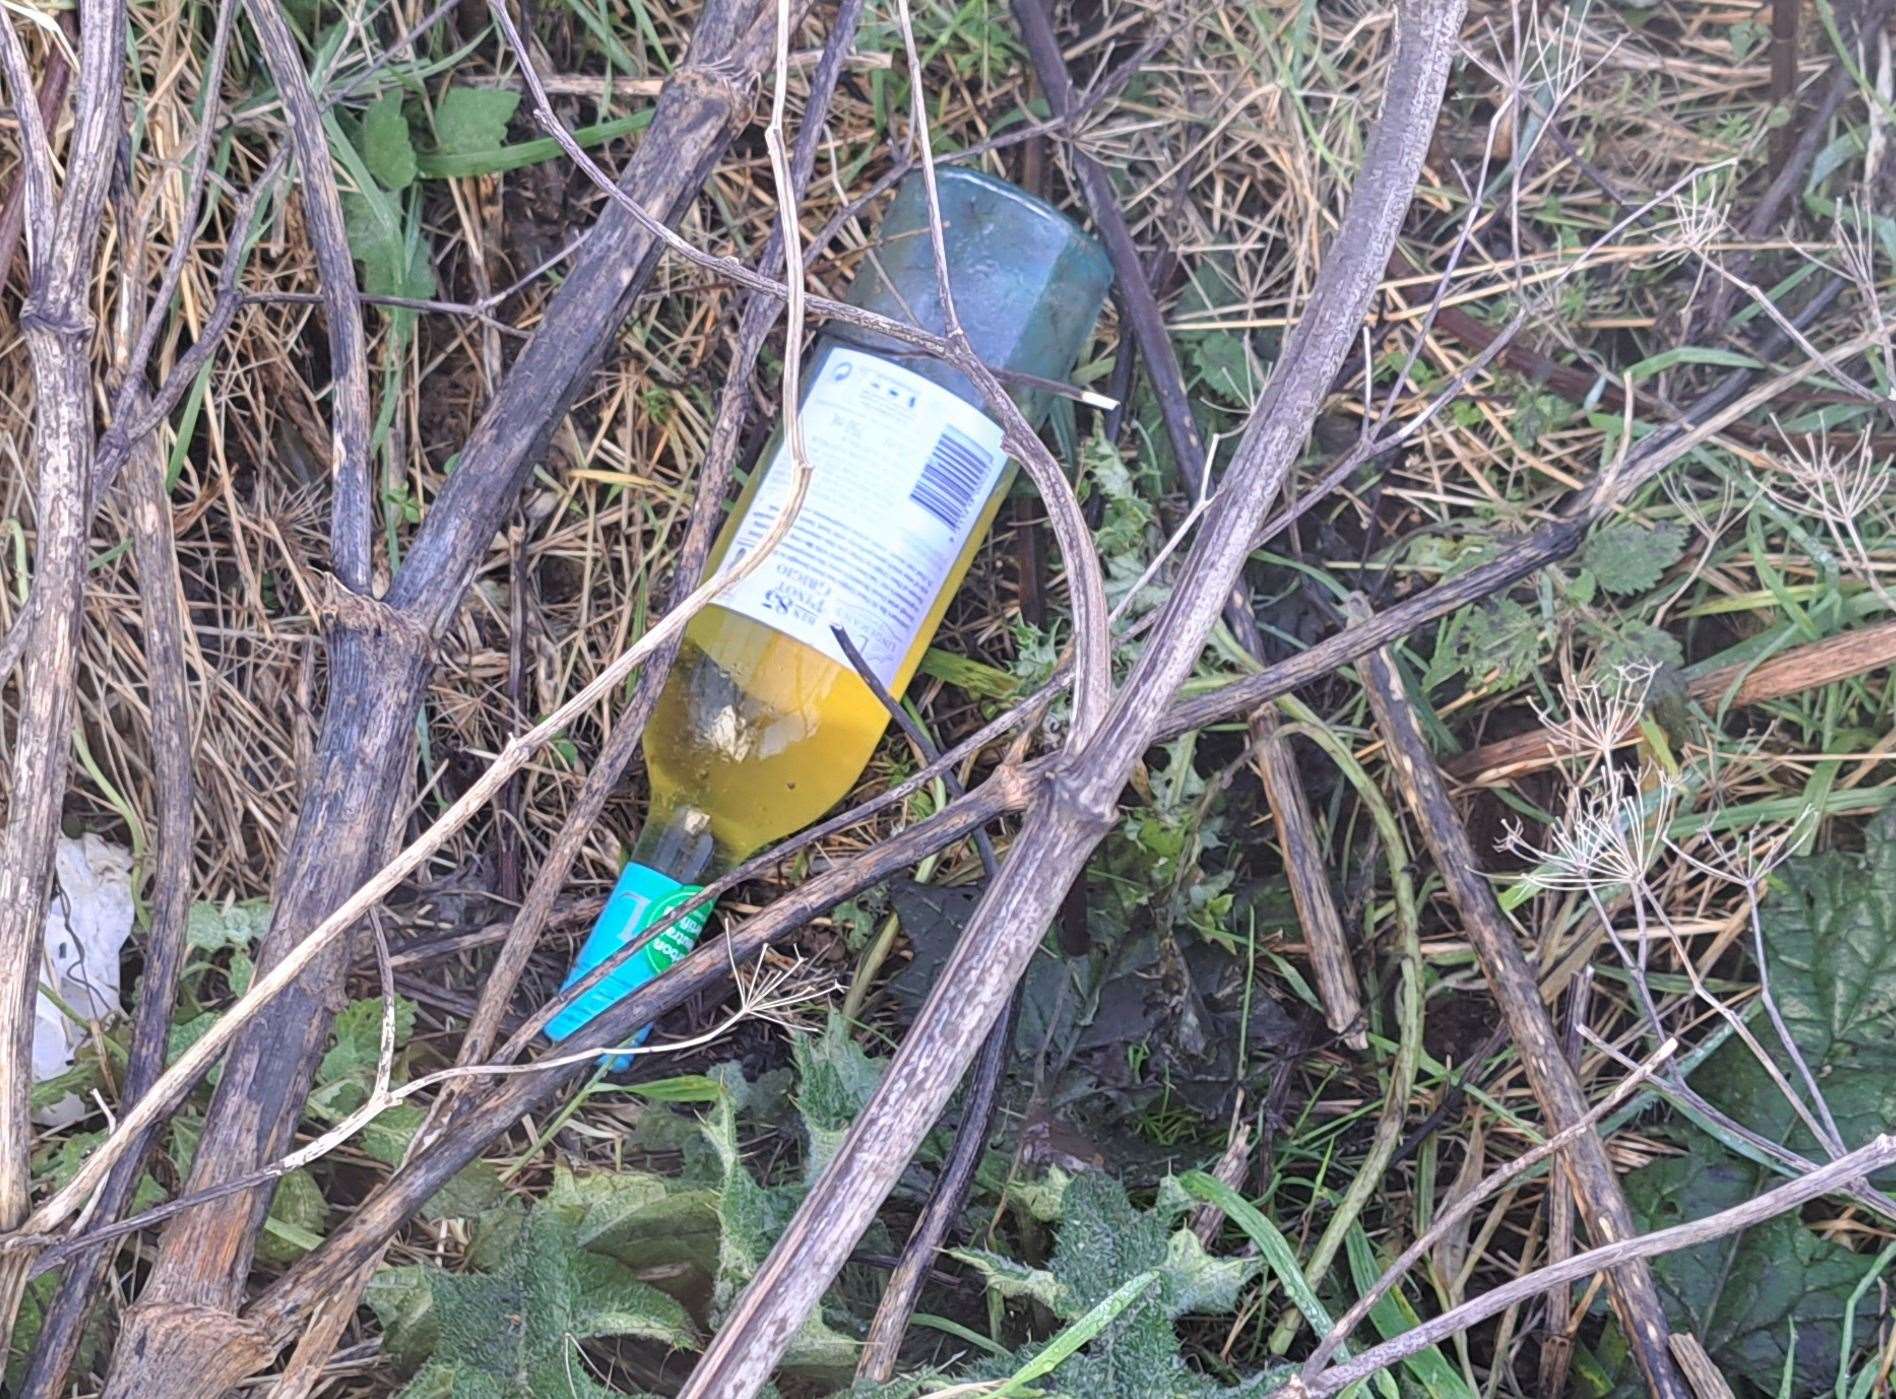 Litter, including bottles filled with yellow liquid, found on verges along the A20 in Dover